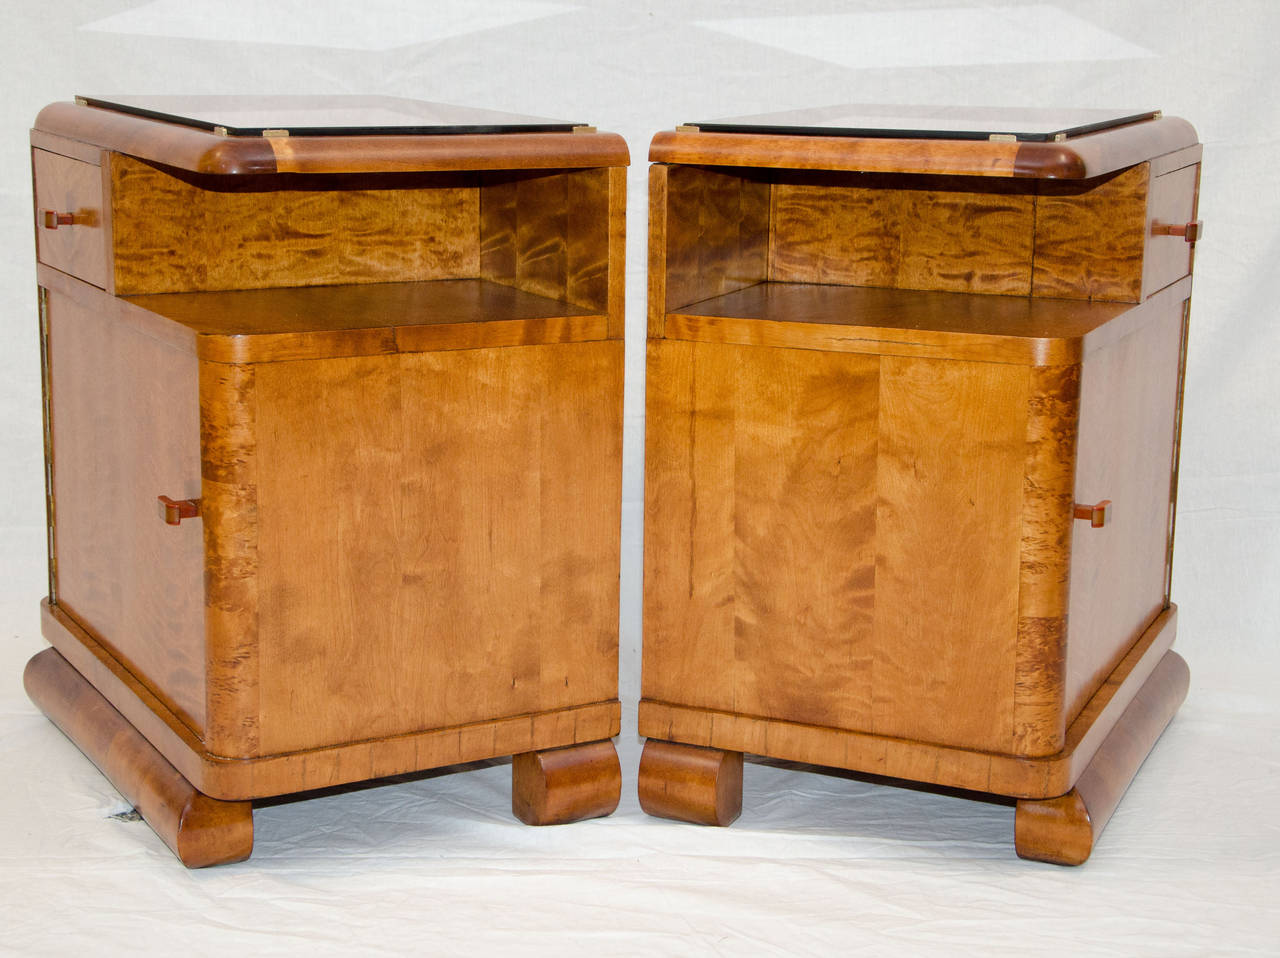 Pair of Nightstands, French Art Deco In Good Condition For Sale In Crockett, CA